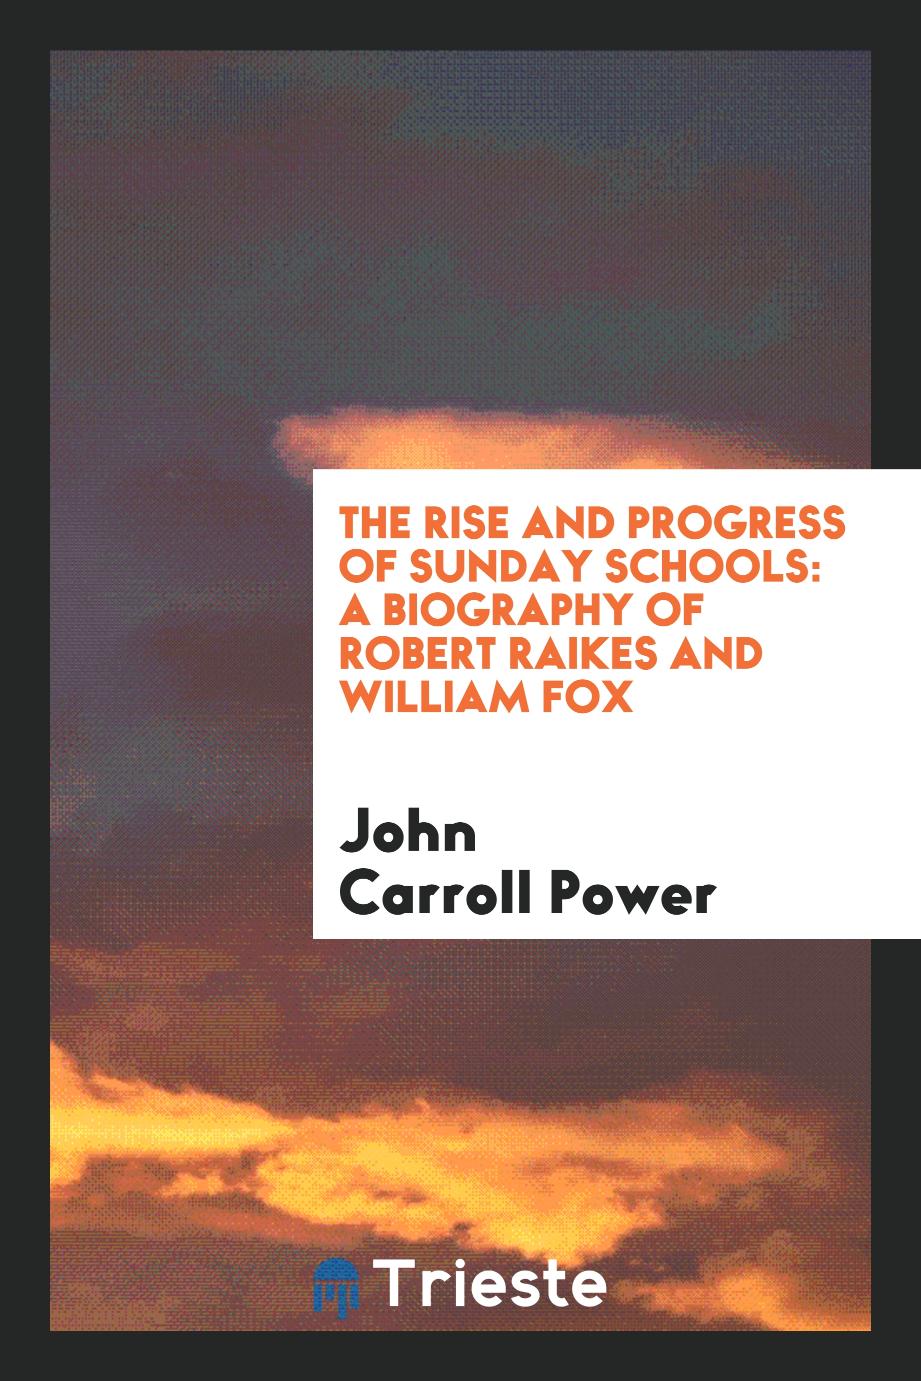 The Rise and Progress of Sunday Schools: A Biography of Robert Raikes and William Fox